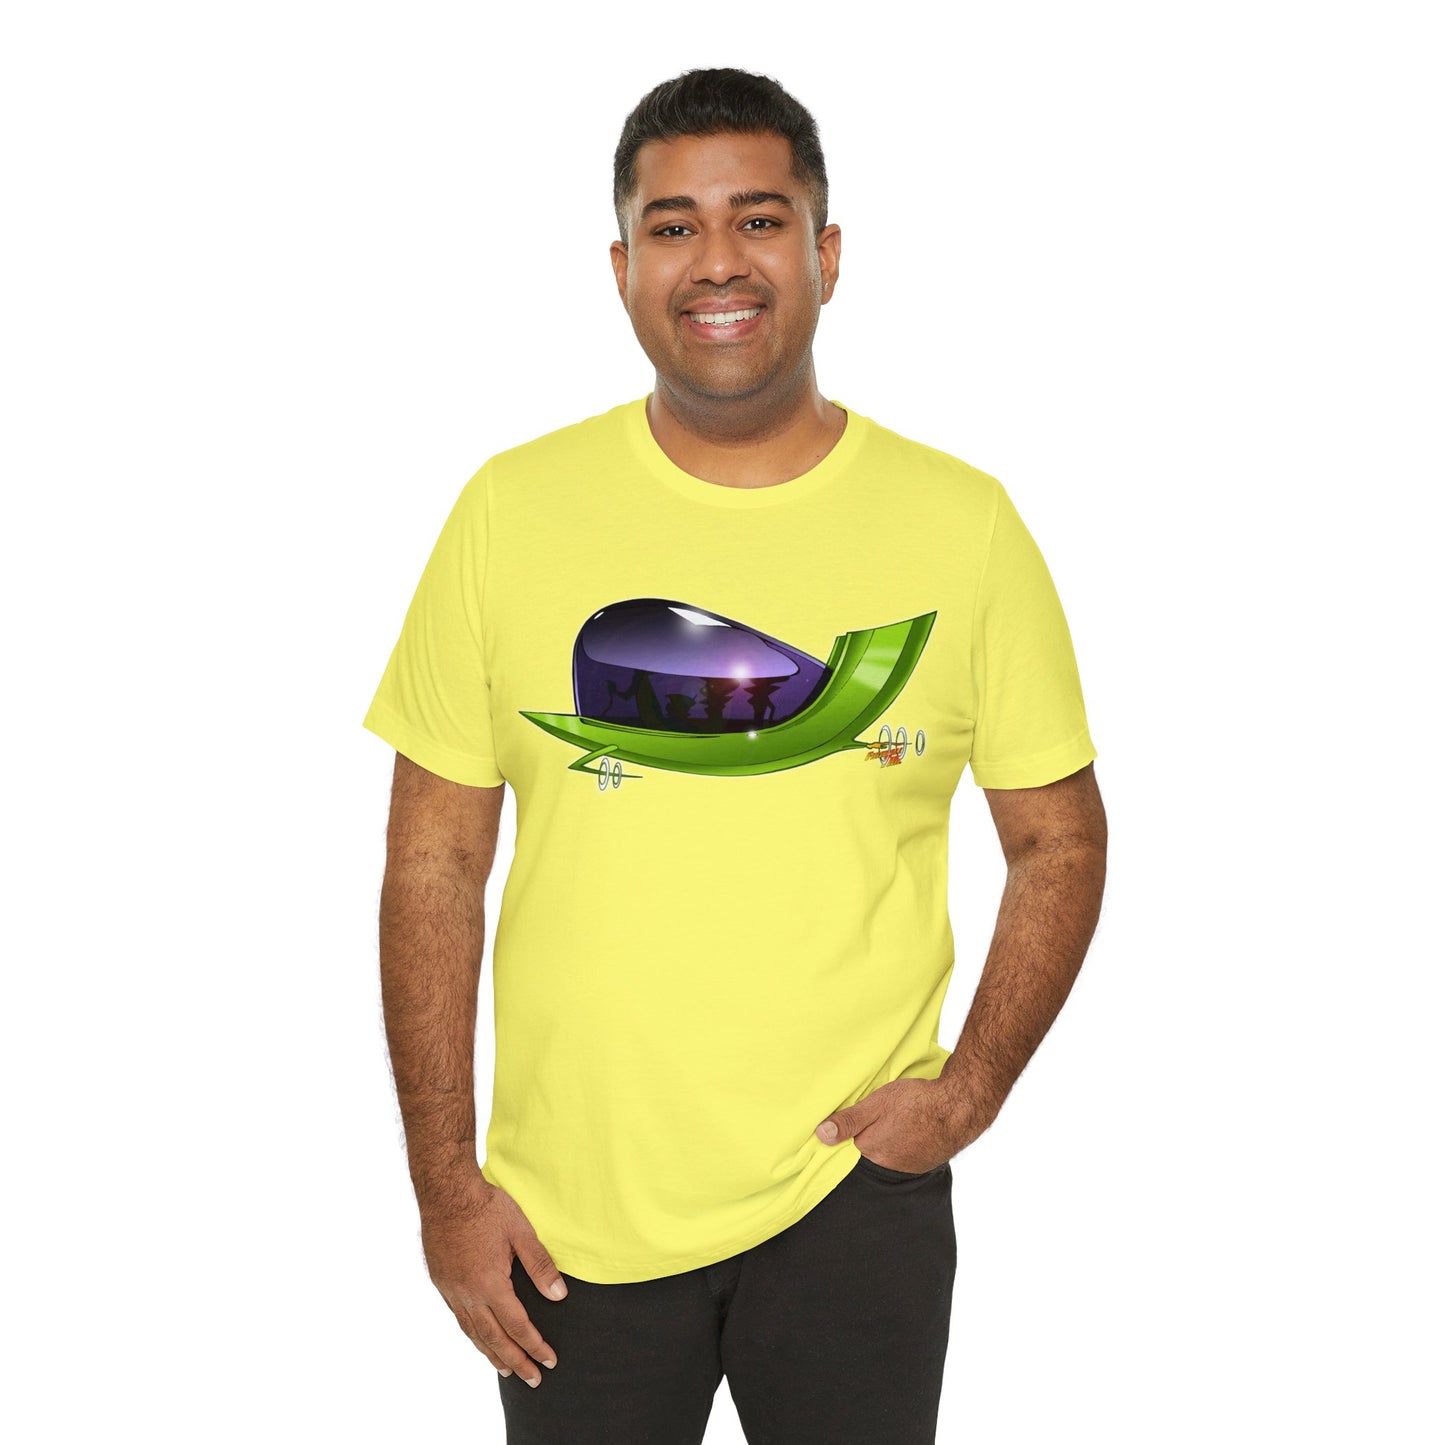 THE JETSONS Family Ship Spaceship Unisex Jersey Short Sleeve Tee